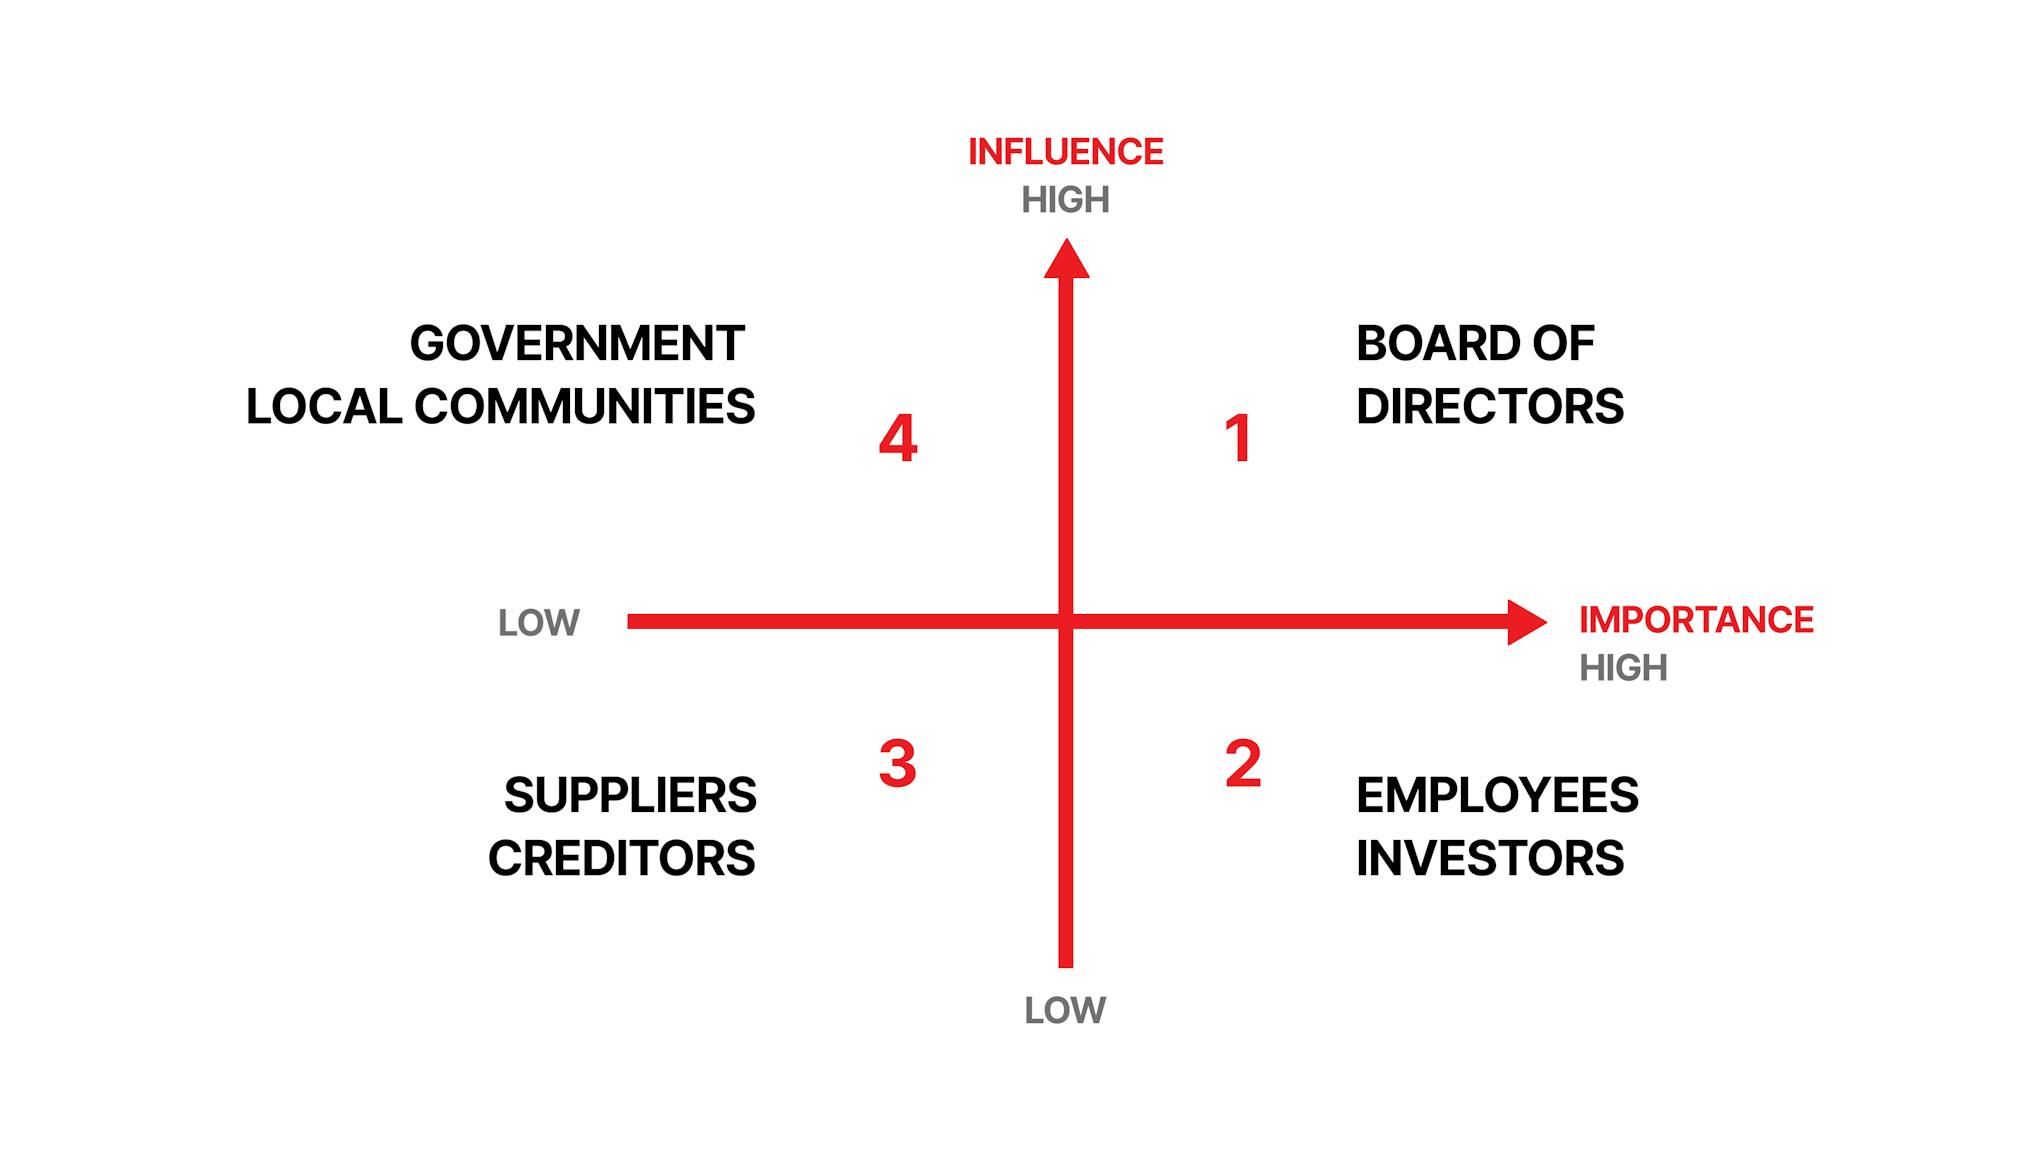 A matrix of the influence and importance of stakeholders